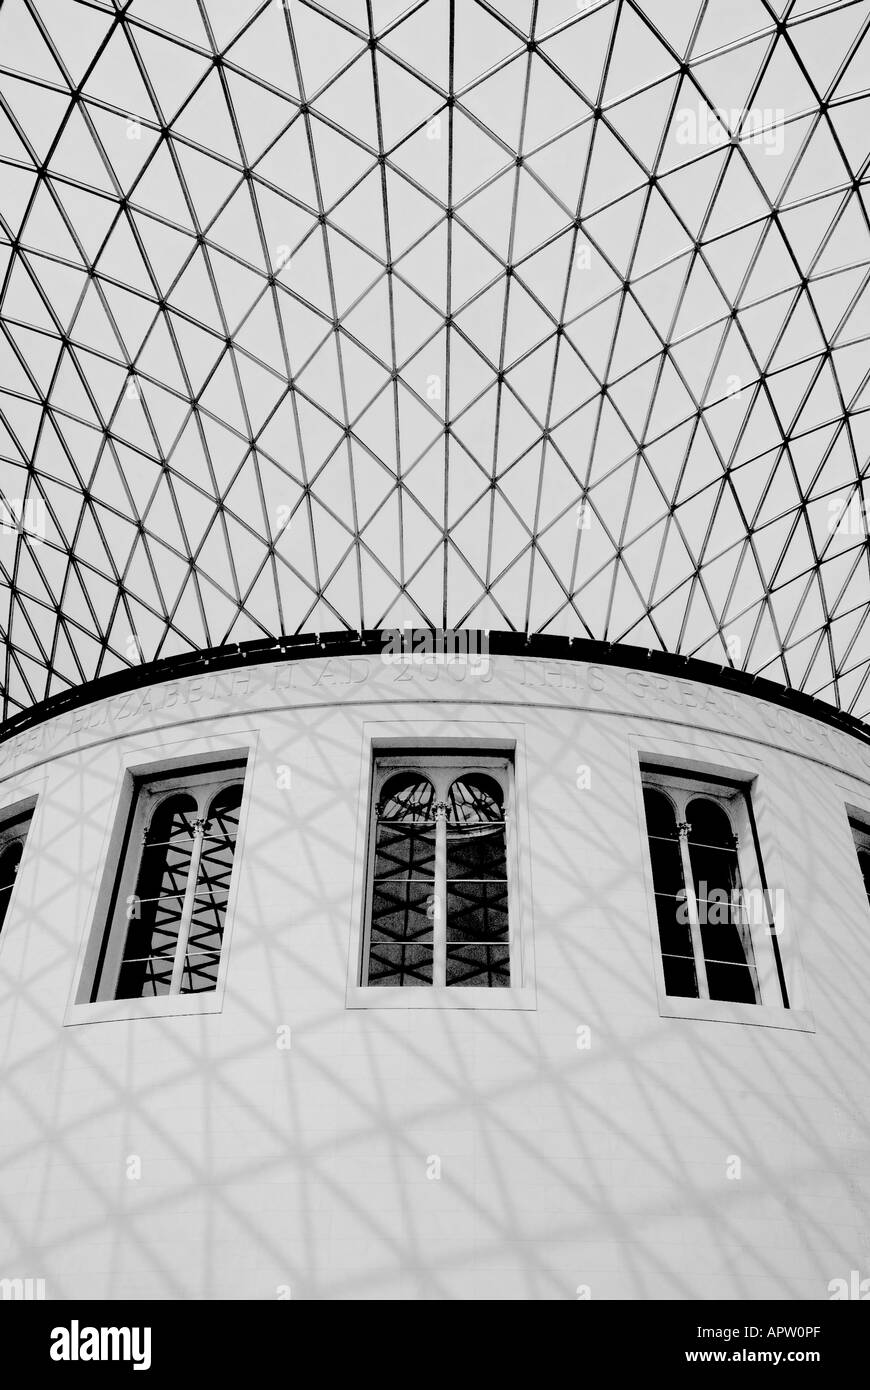 British Museum, Black and White Landscape, Abstract Design, Building, Londres, Angleterre, Royaume-Uni, GB. Banque D'Images